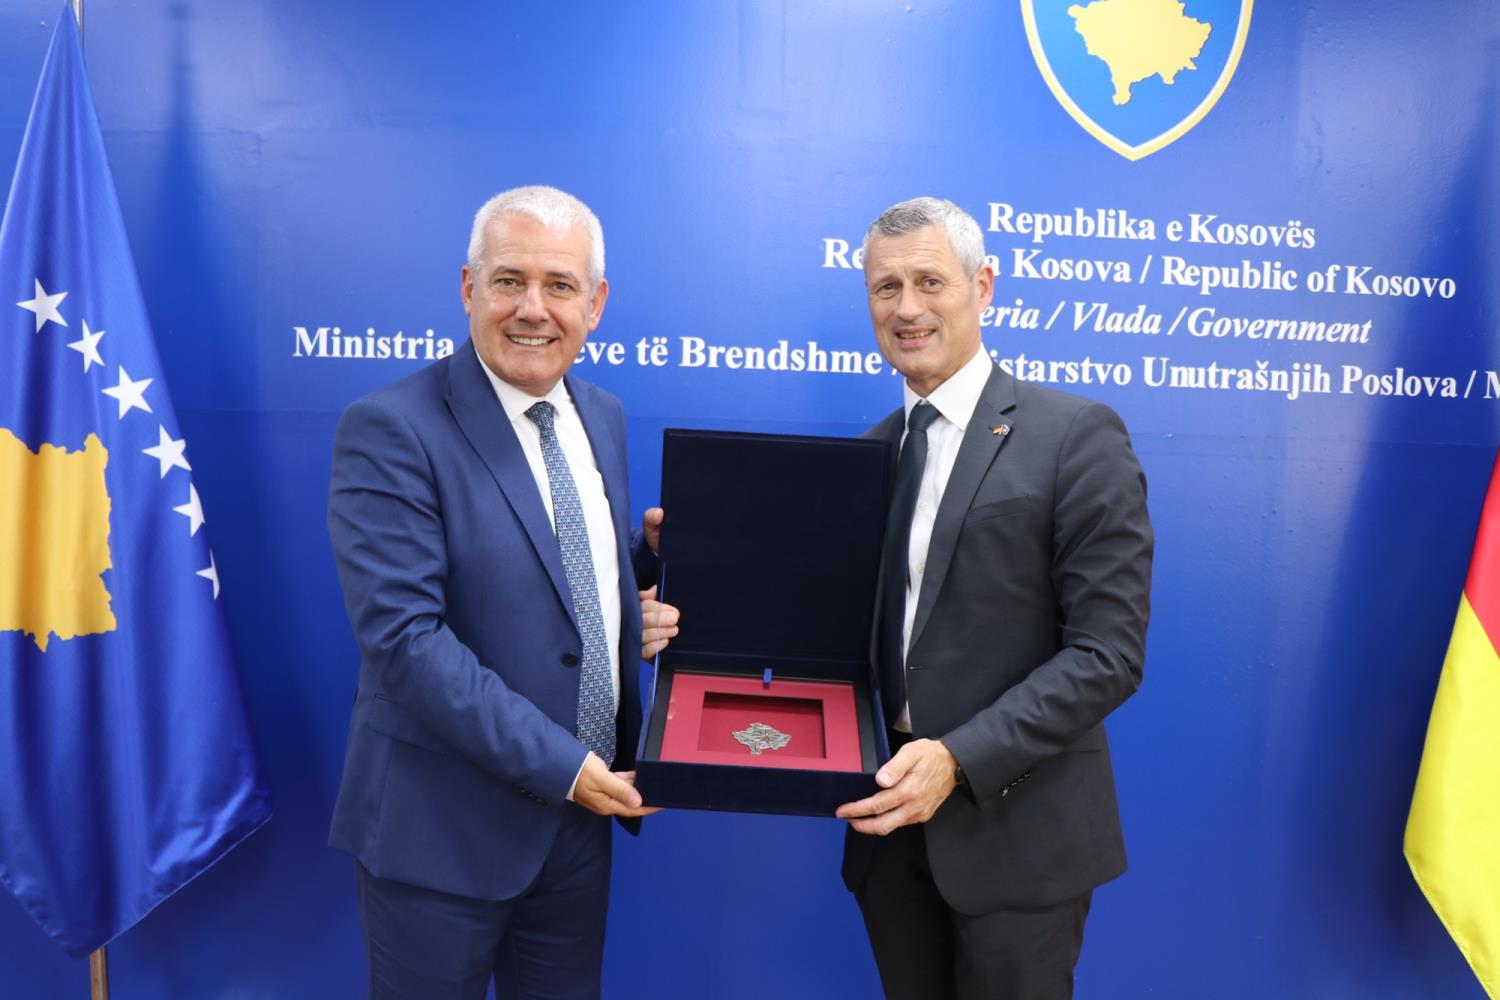 The Minister of Internal Affairs Xhelal Sveçla hosts in a meeting the Secretary of the Federal Ministry of the Interior of Germany Bernd Krosser